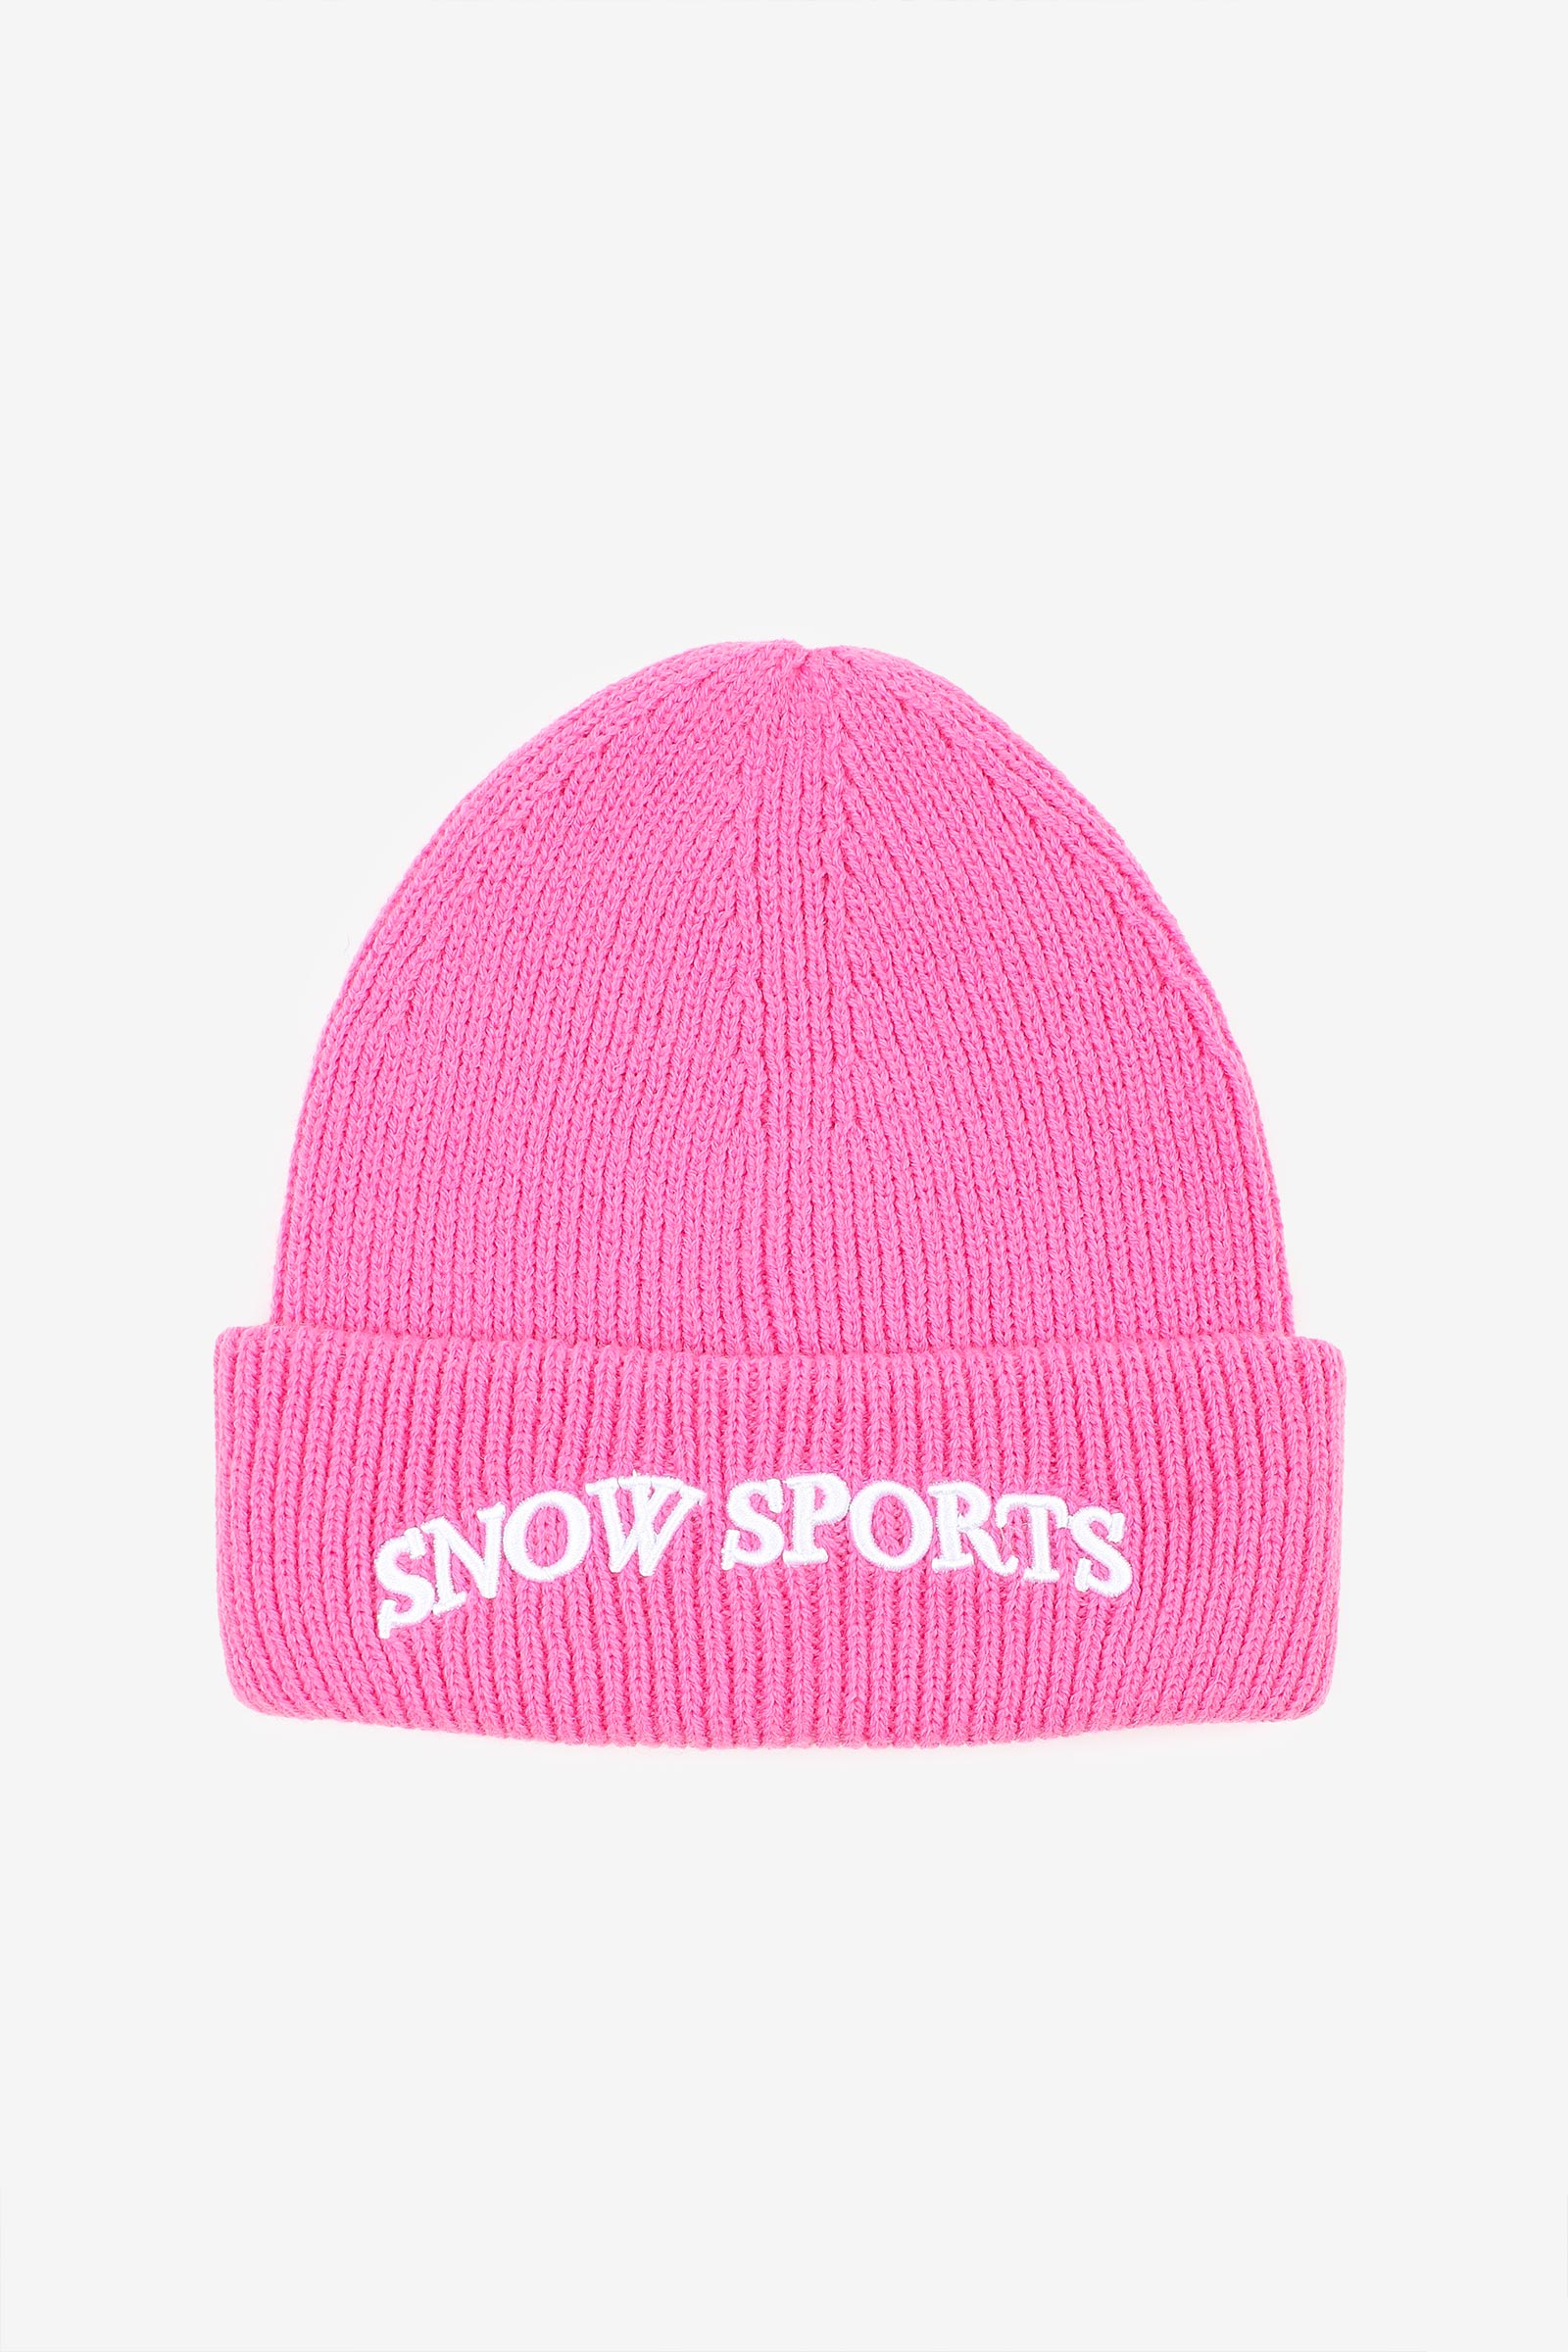 Ardene Snow Sports Ribbed Beanie in Pink | Polyester | Eco-Conscious